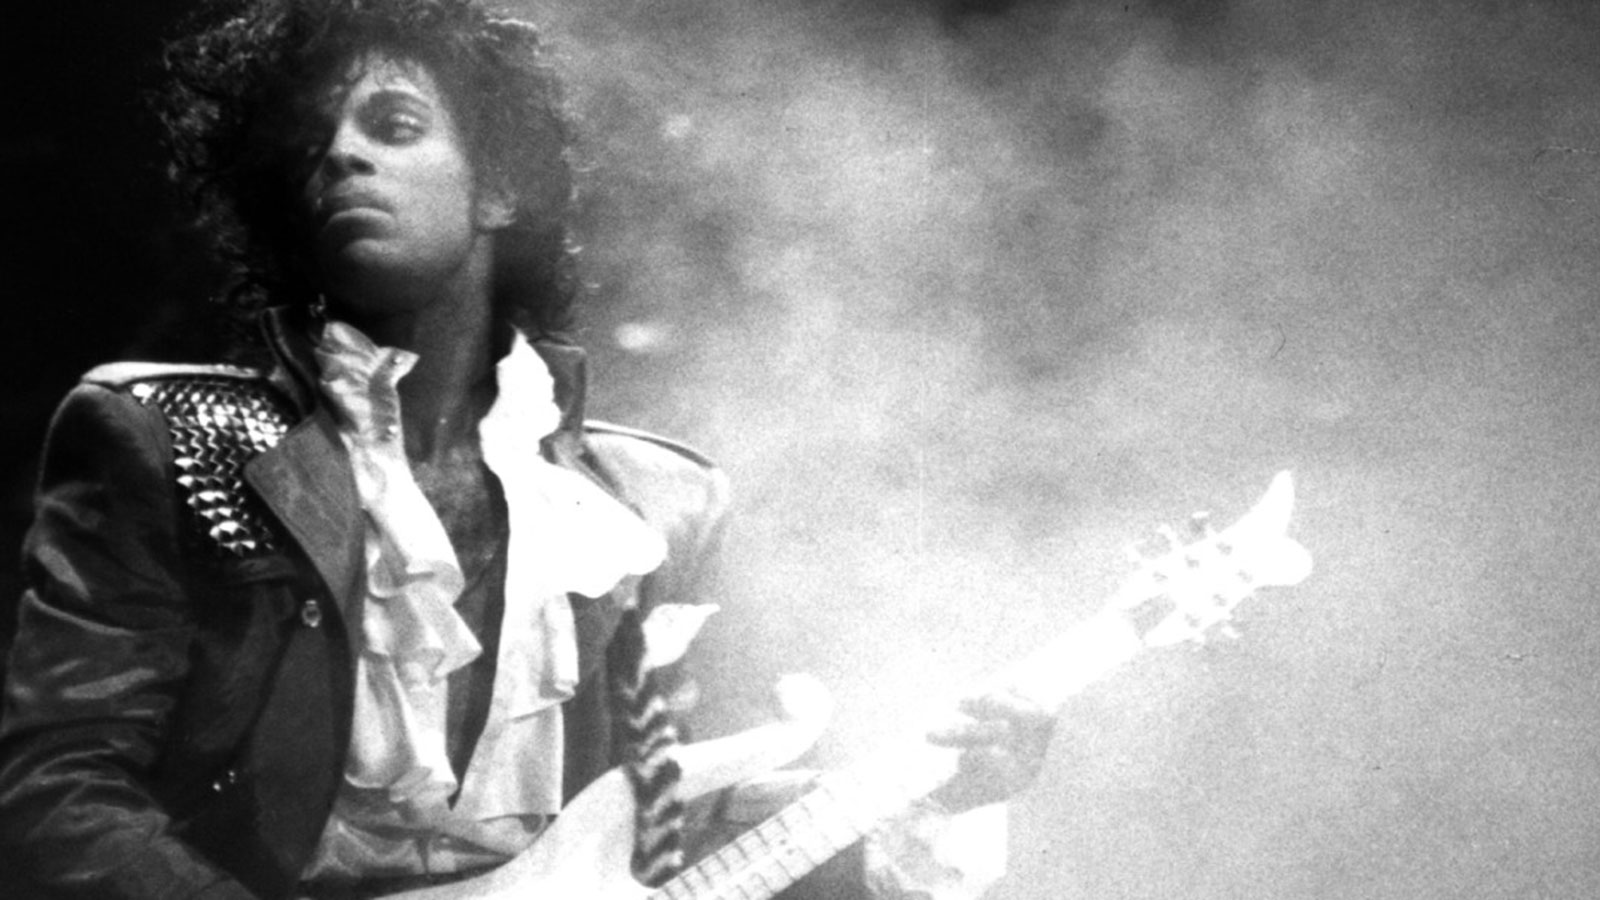 PRINCE DEAD AT 57